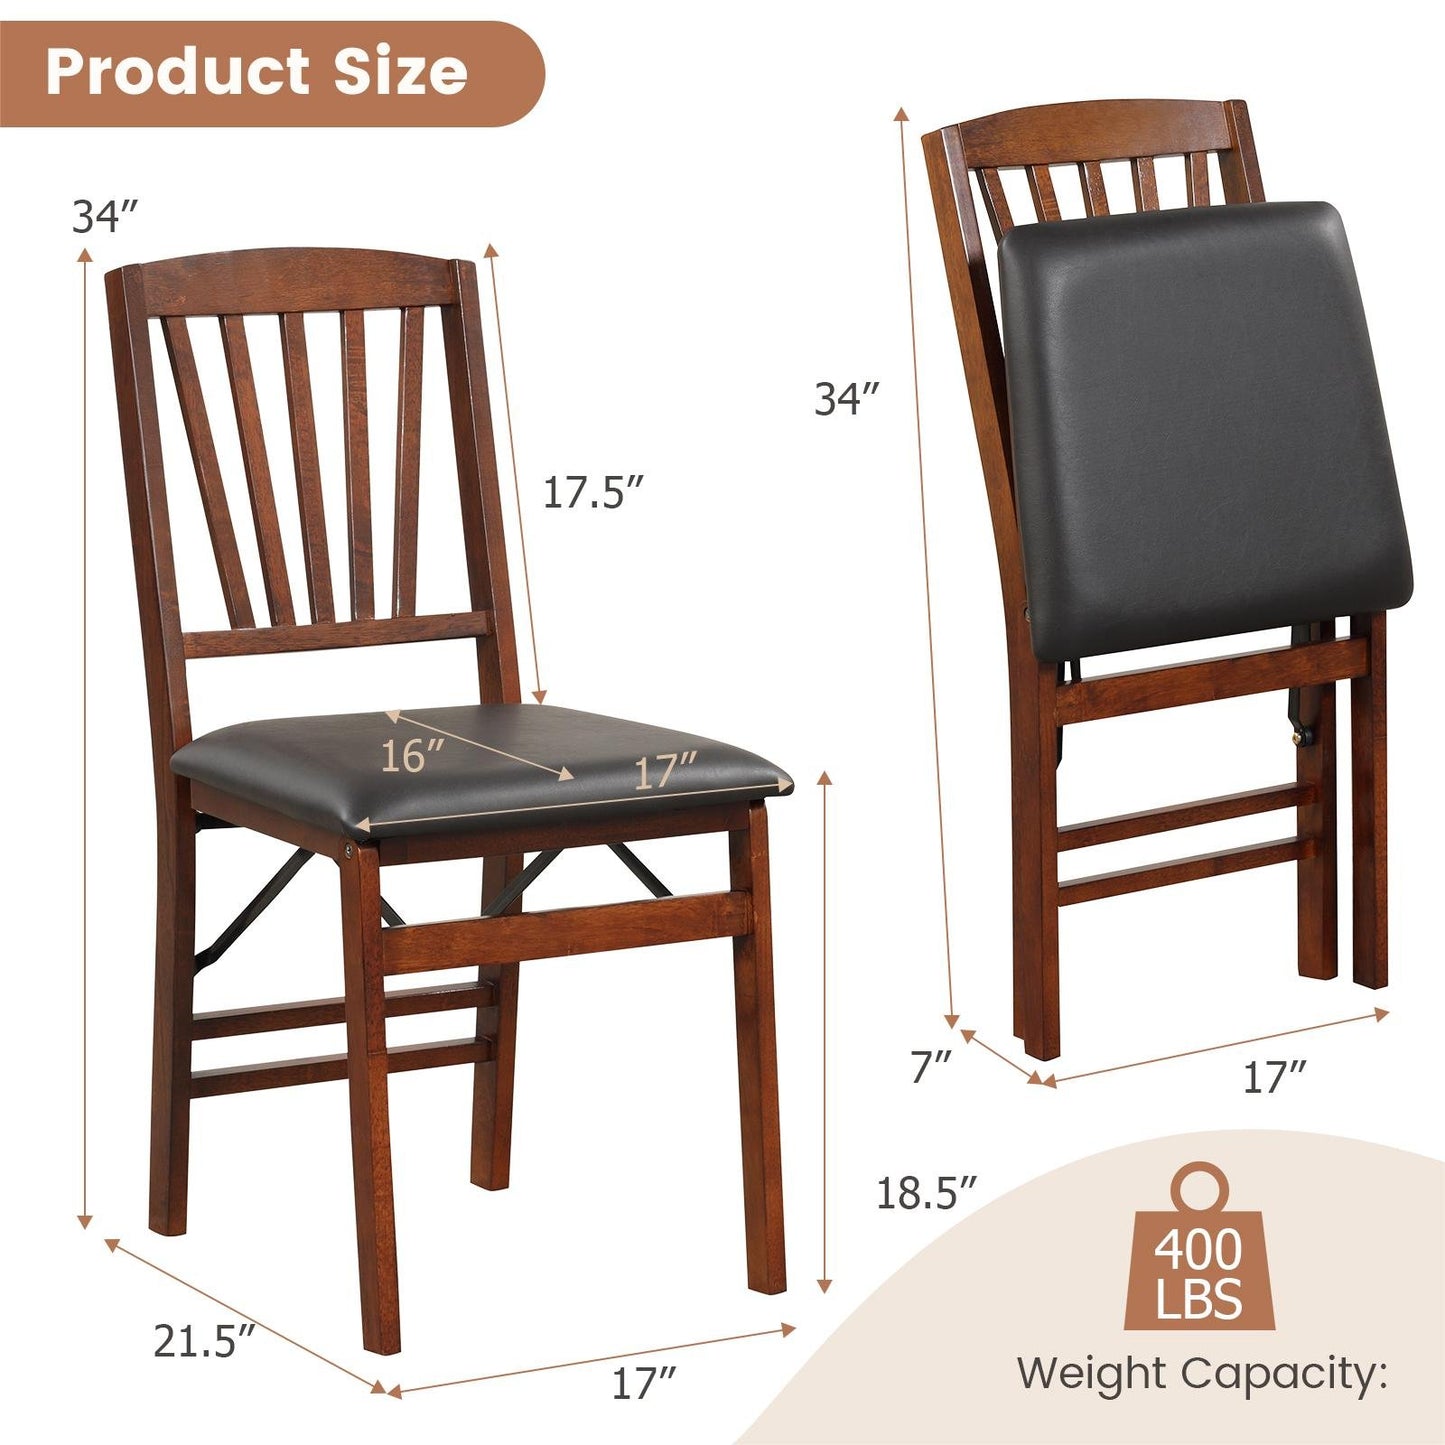 Set of 2 Folding Chairs with Padded Seat and Rubber Wood Frame, Brown